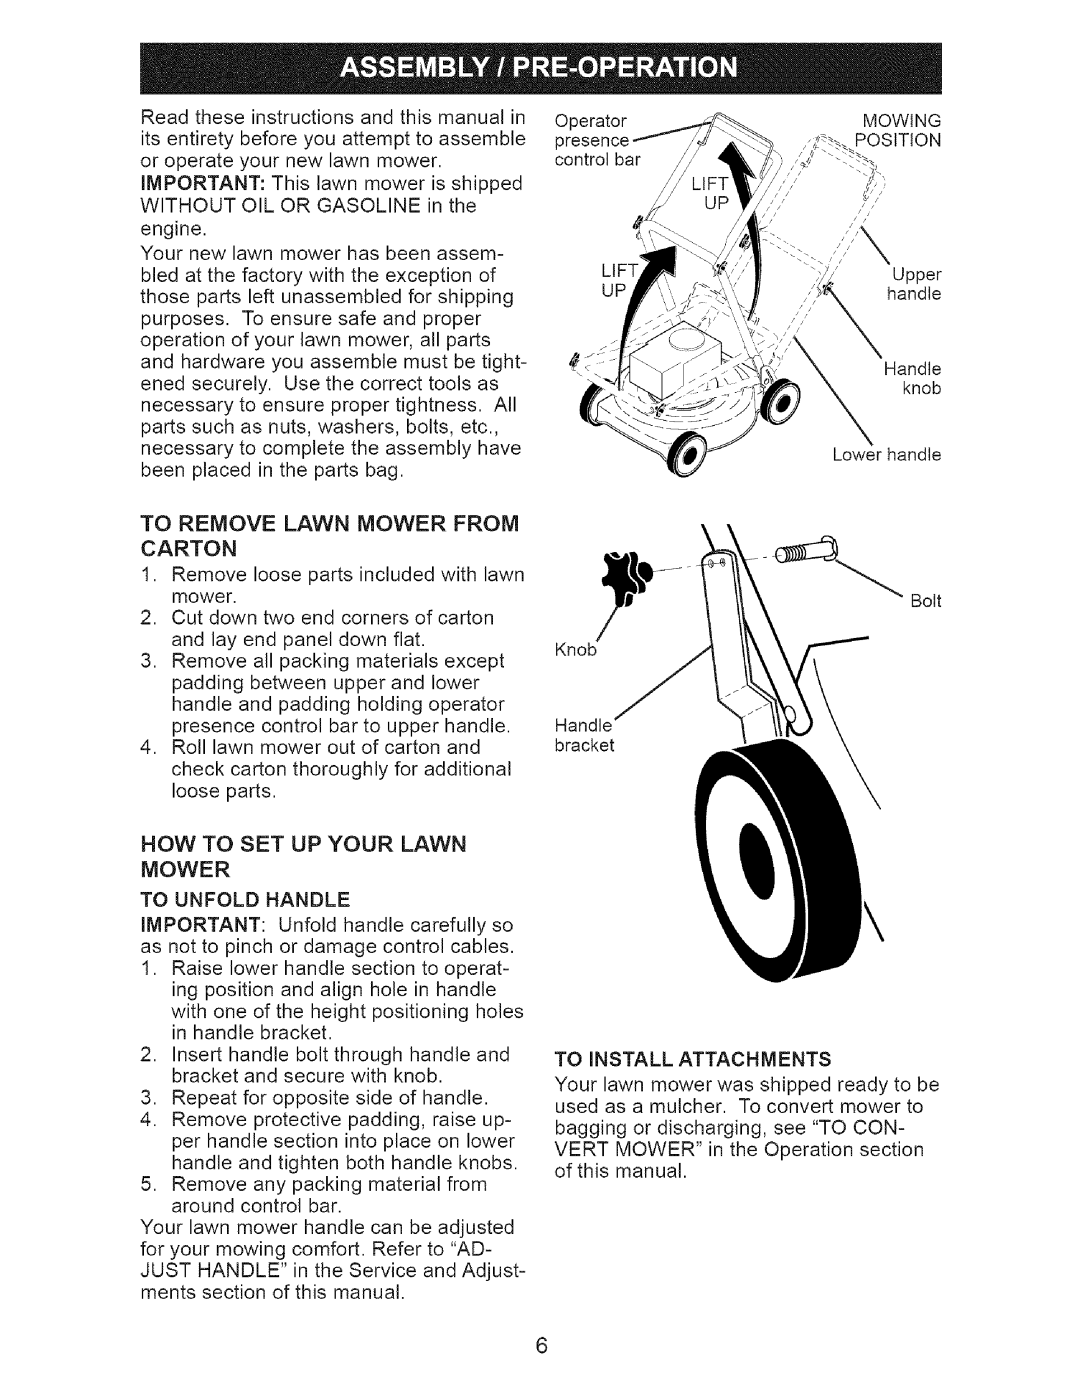 Craftsman 917-371813 manual How To Set Up Your Lawn, Mower 